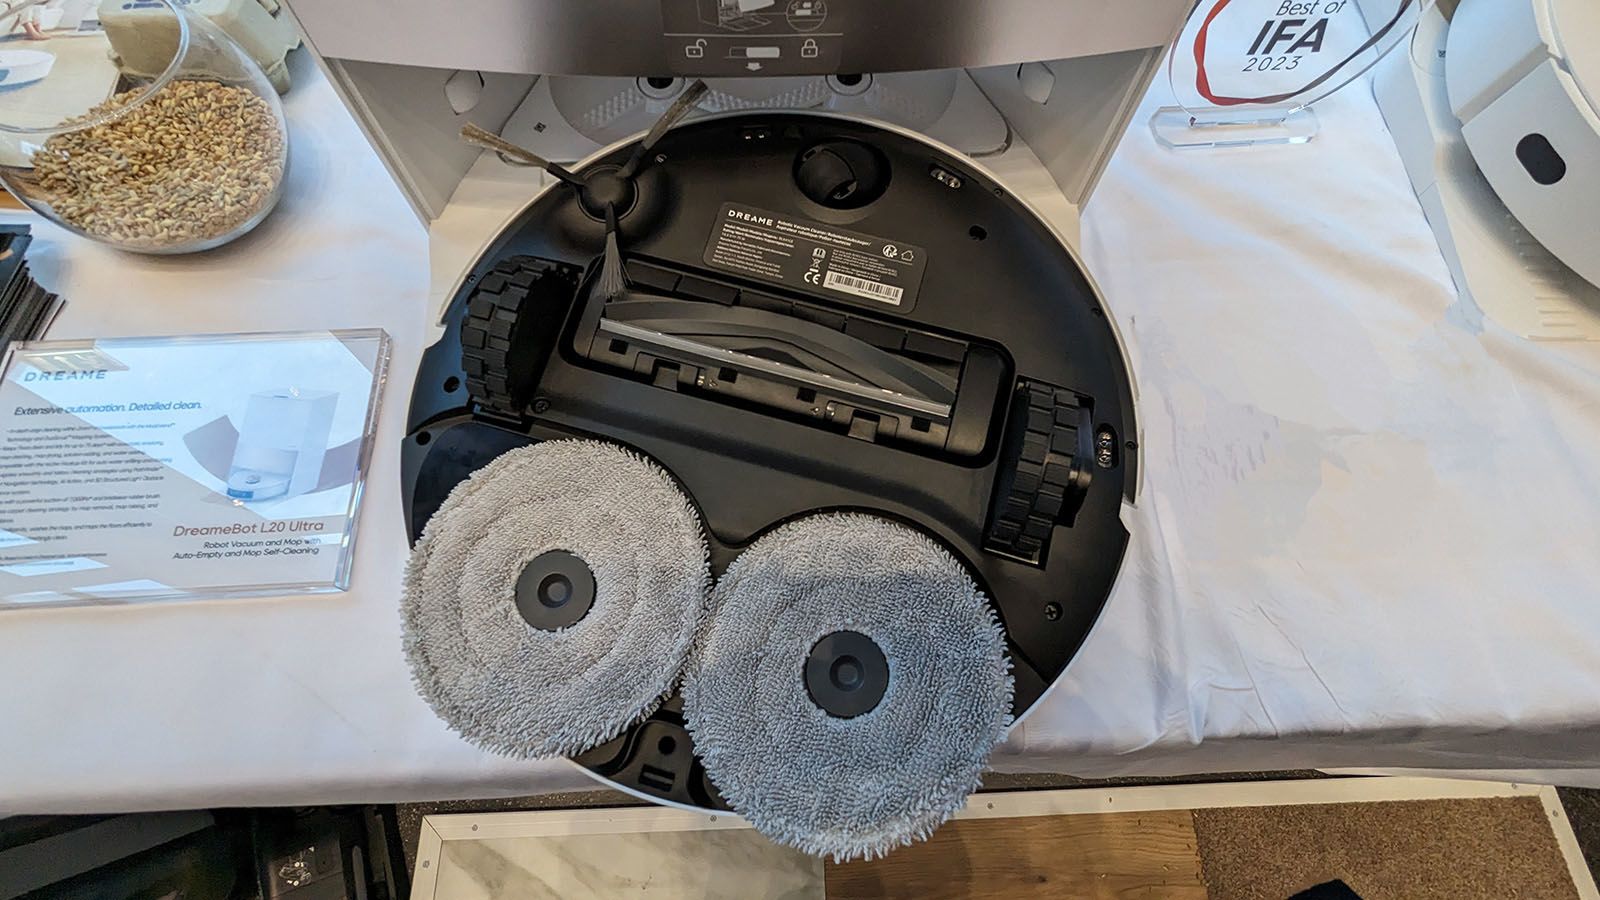 Dreamebot L20 Ultra review: New features improve cleaning - Tech